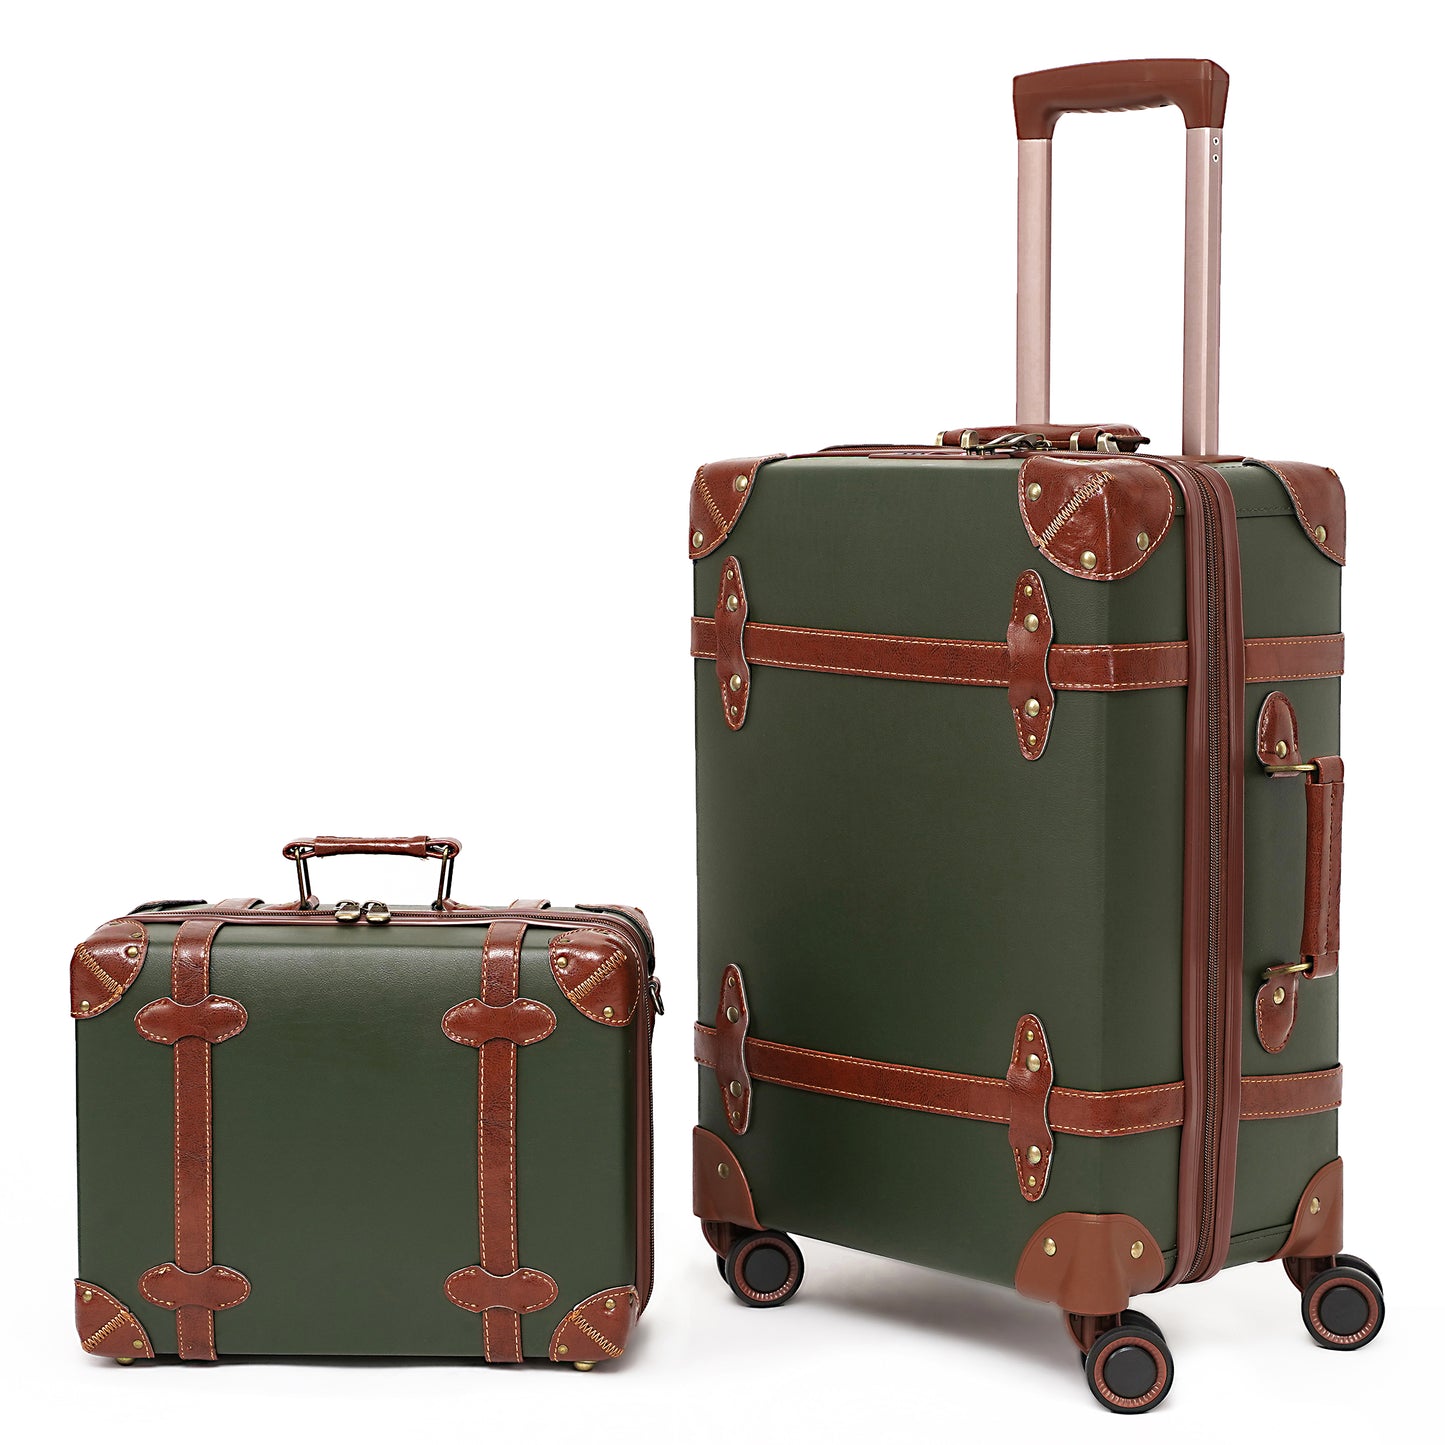 NZBZ Vintage Luggage Set Carry On Cute Suitcase with Rolling Spinner Wheels and Tsa Lock Retro Trunk luggage 2 pieces